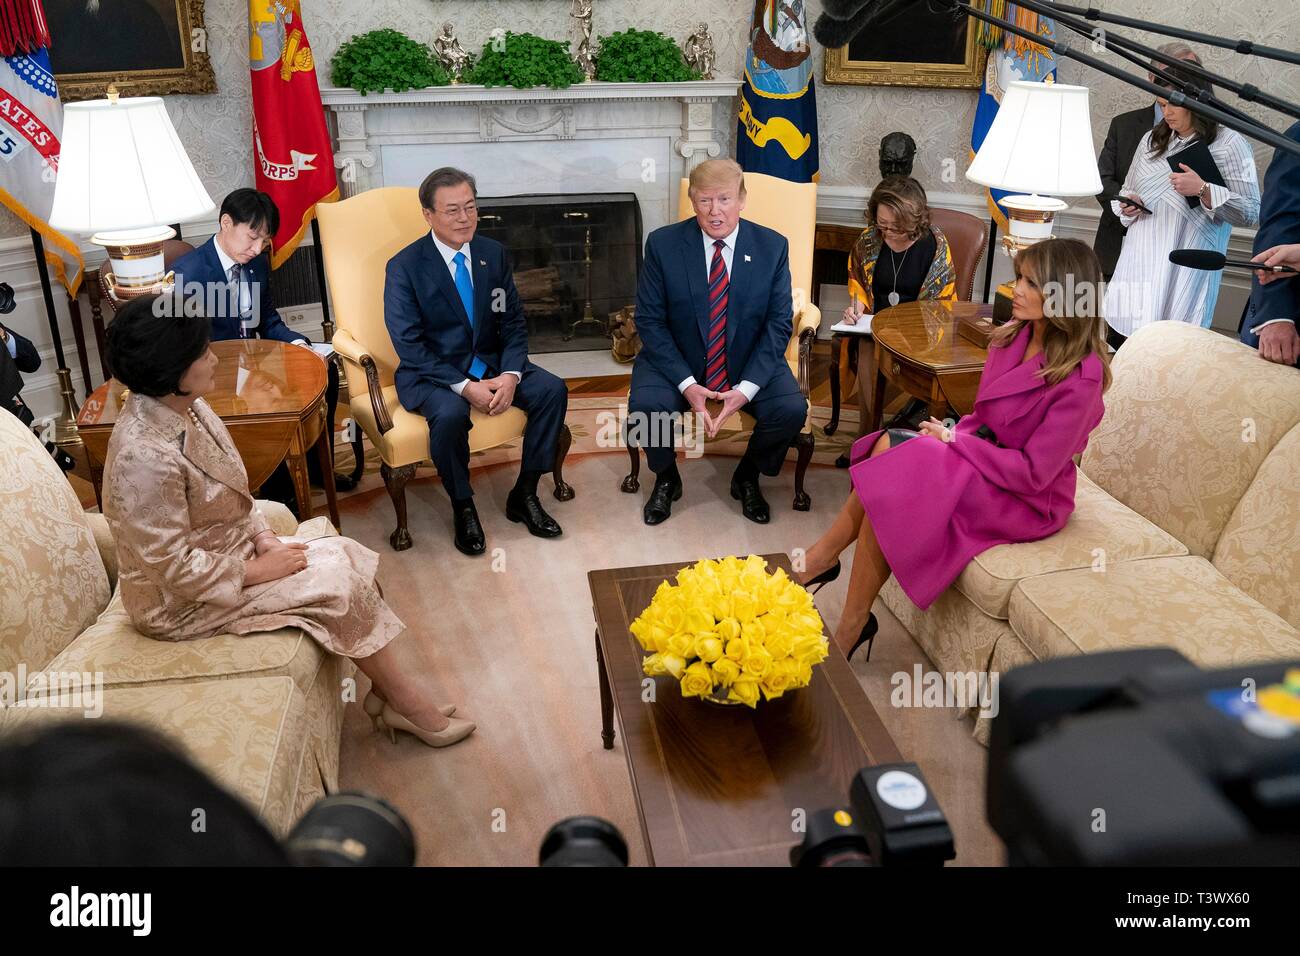 Washington, United States Of America. 11th Apr, 2019. U.S. President Donald Trump, South Korean President Moon Jae-in, Mrs. Kim Jung-sook and First Lady Melania Trump during a meeting in the Oval Office of the White House April 11, 2019 in Washington, DC Credit: Planetpix/Alamy Live News Stock Photo